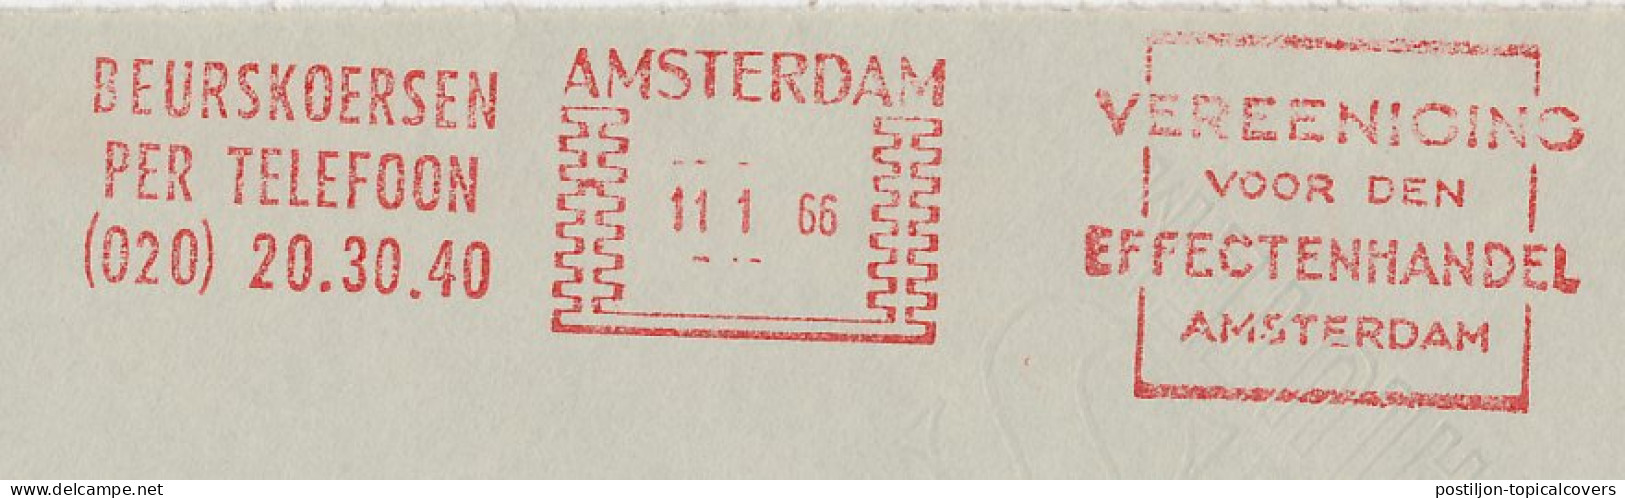 Meter Cover Netherlands 1966 Stock Price By Phone - Securities Trade Association - Unclassified